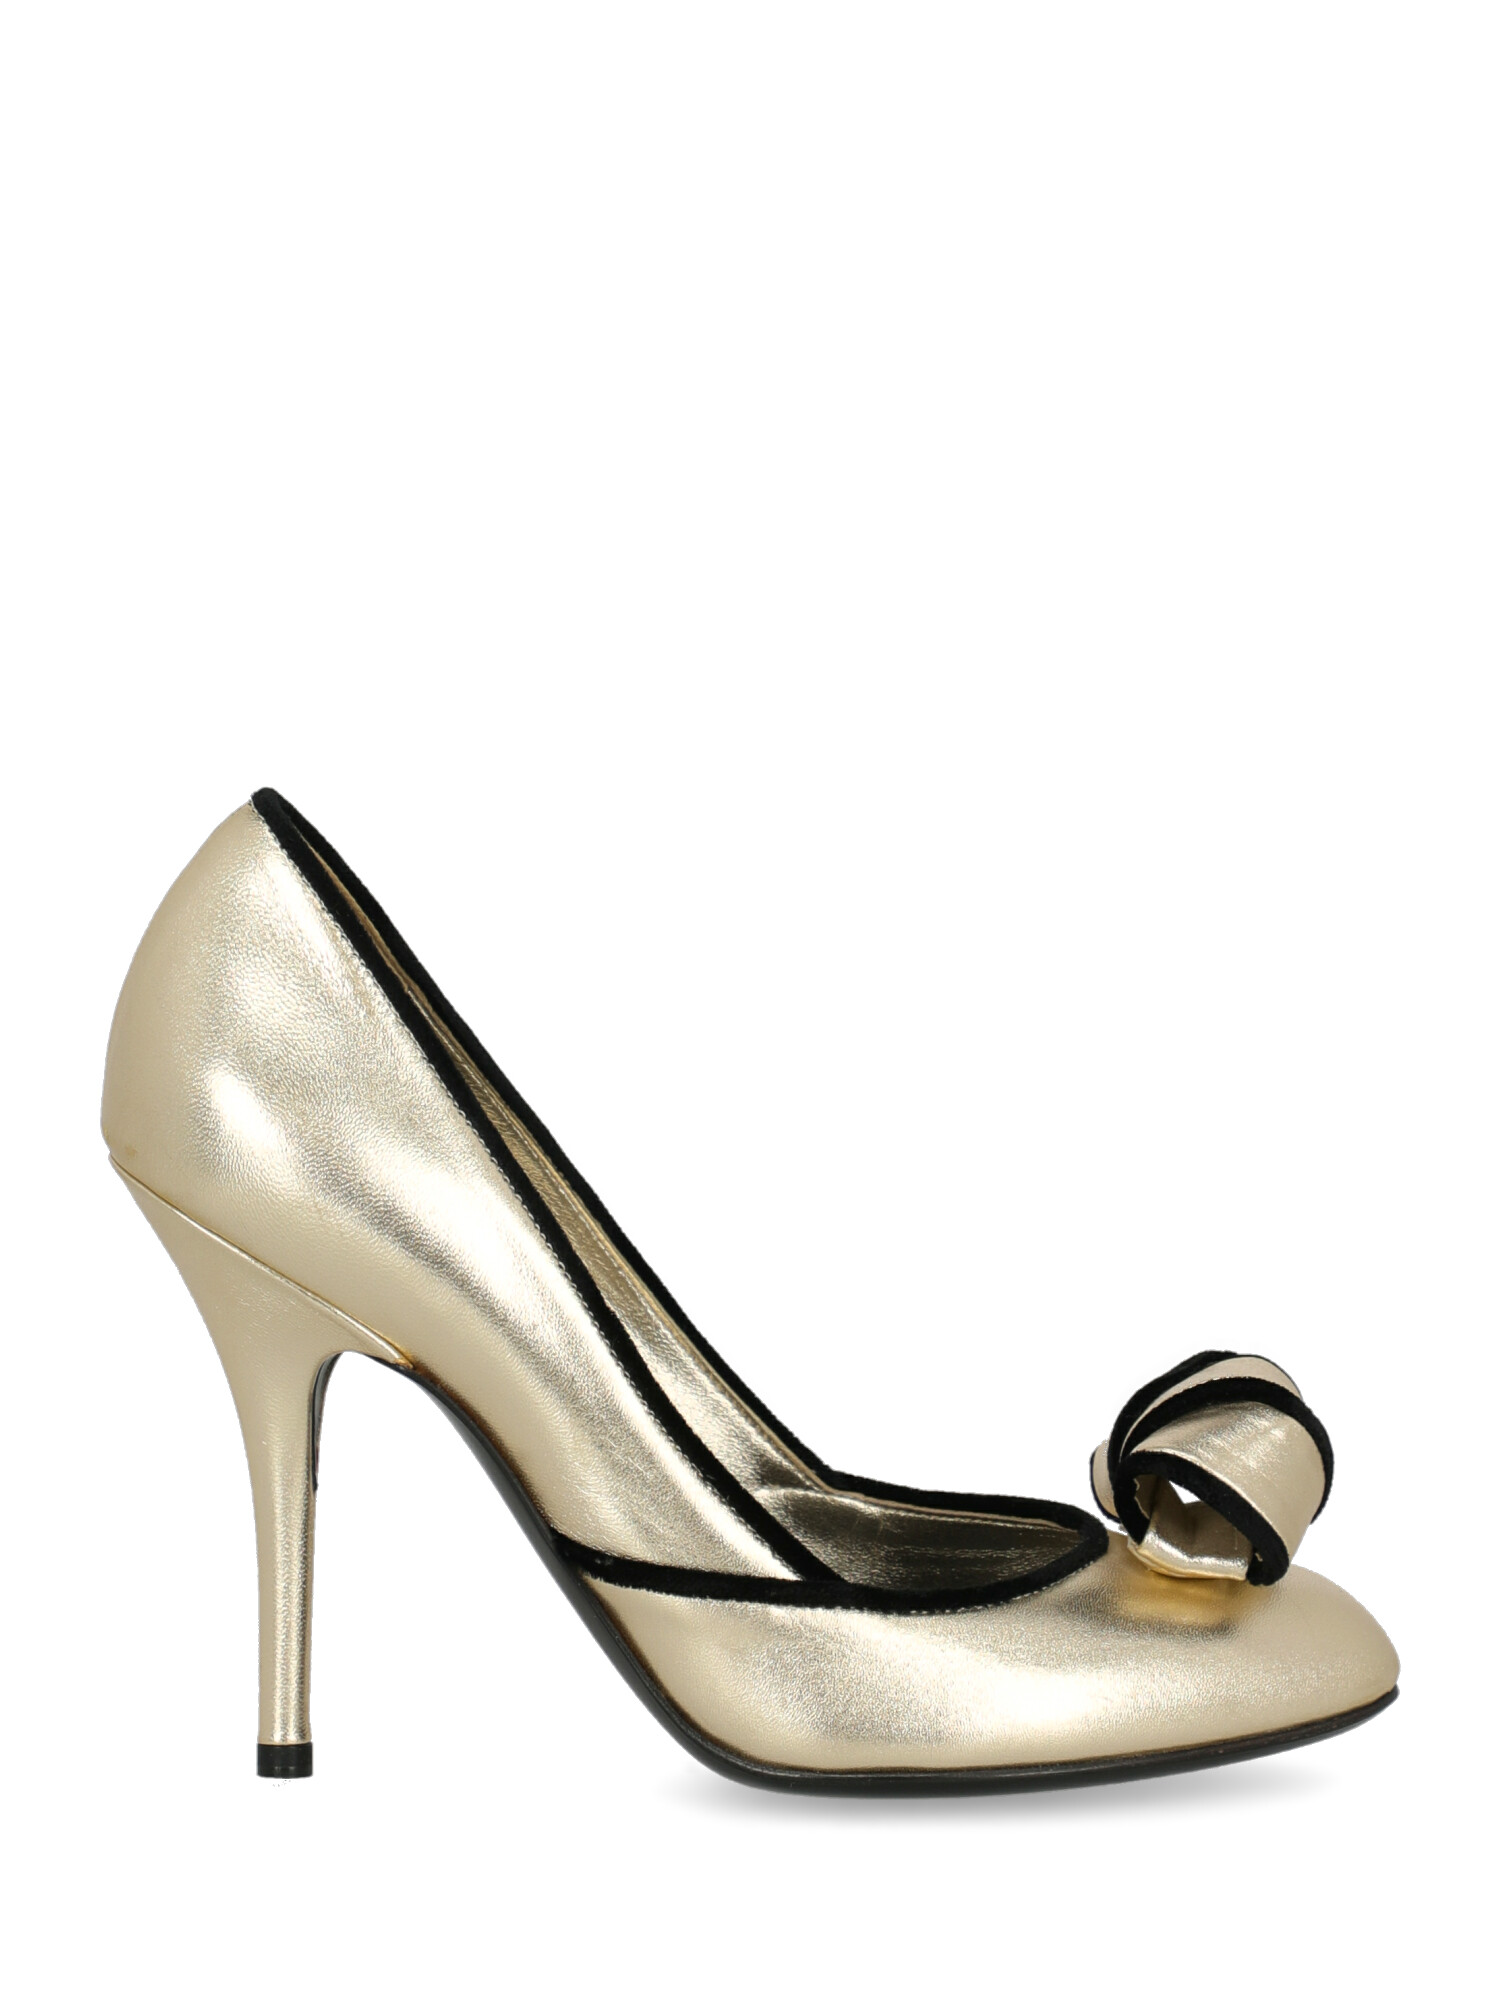 Pre-owned Sergio Rossi Shoe In Black, Gold